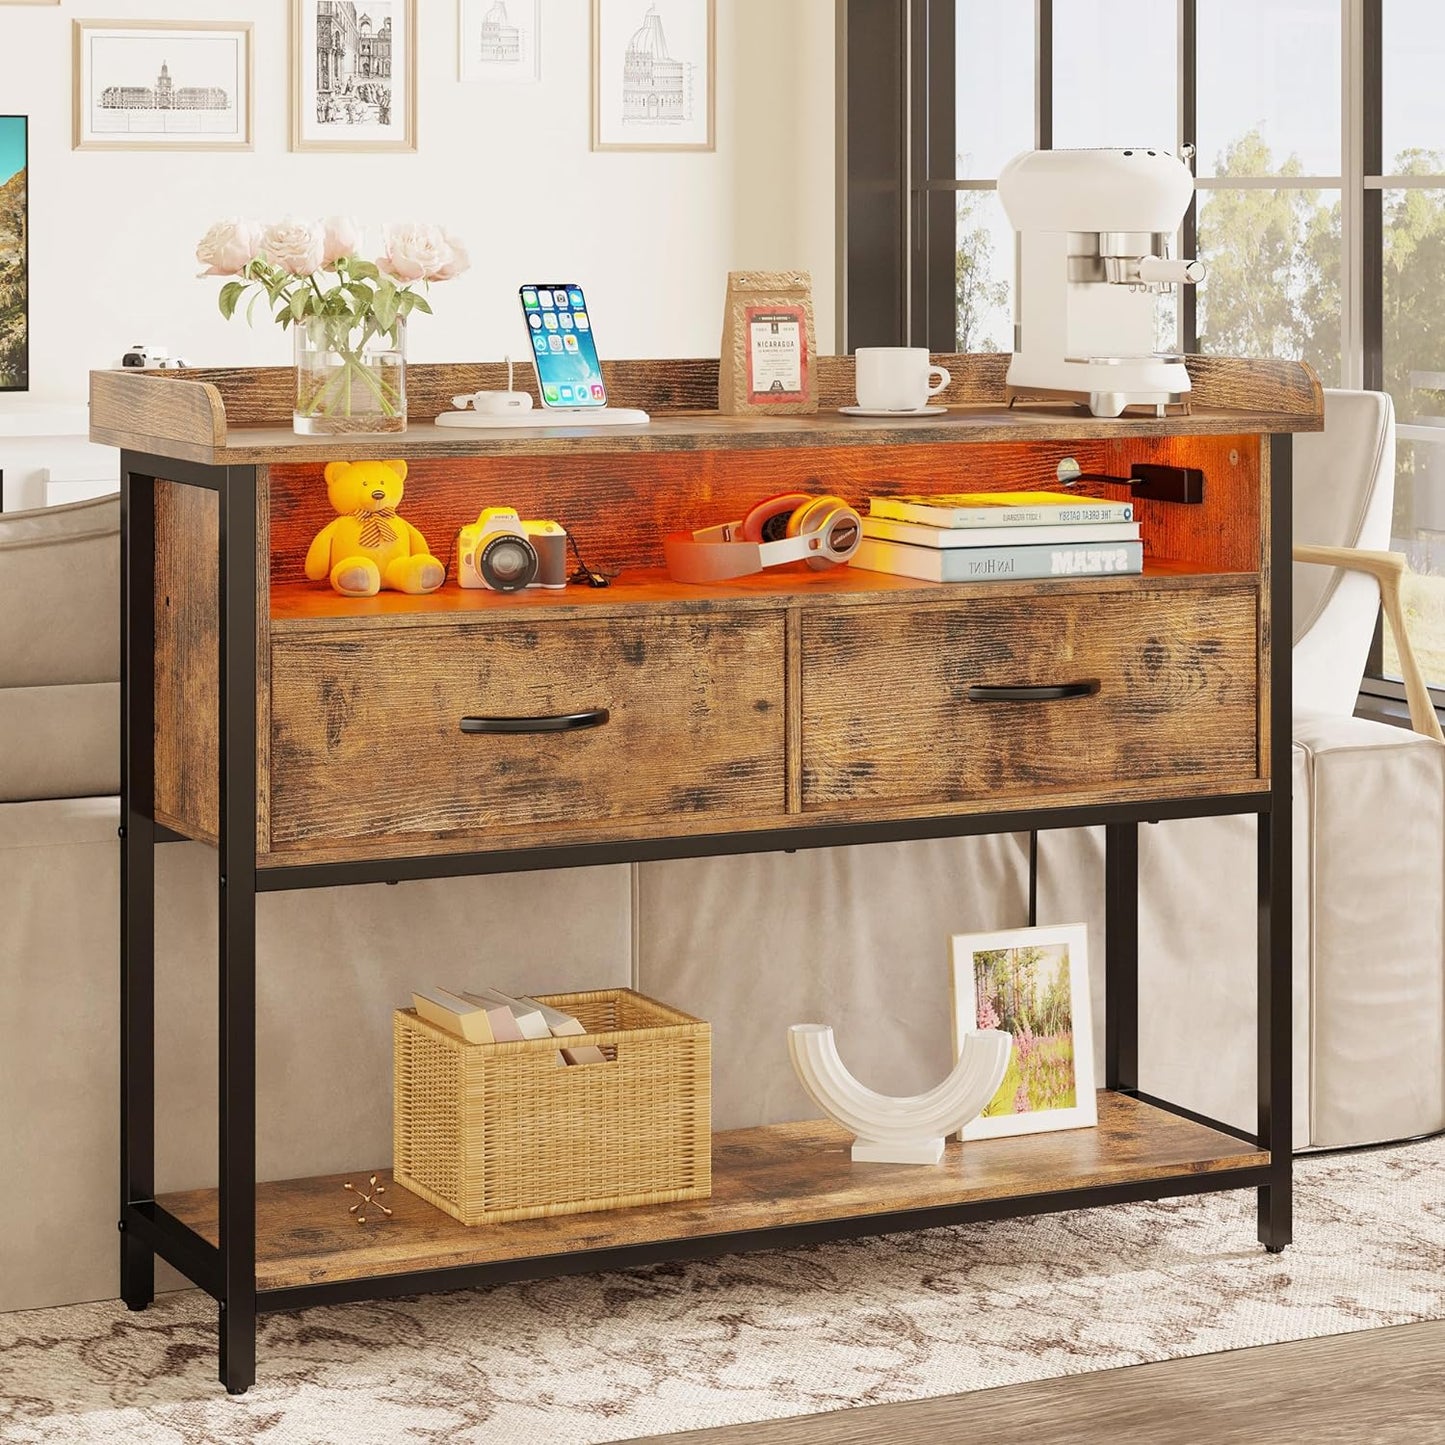 IRONCK LED Entryway Table with 2 Fabric Drawers